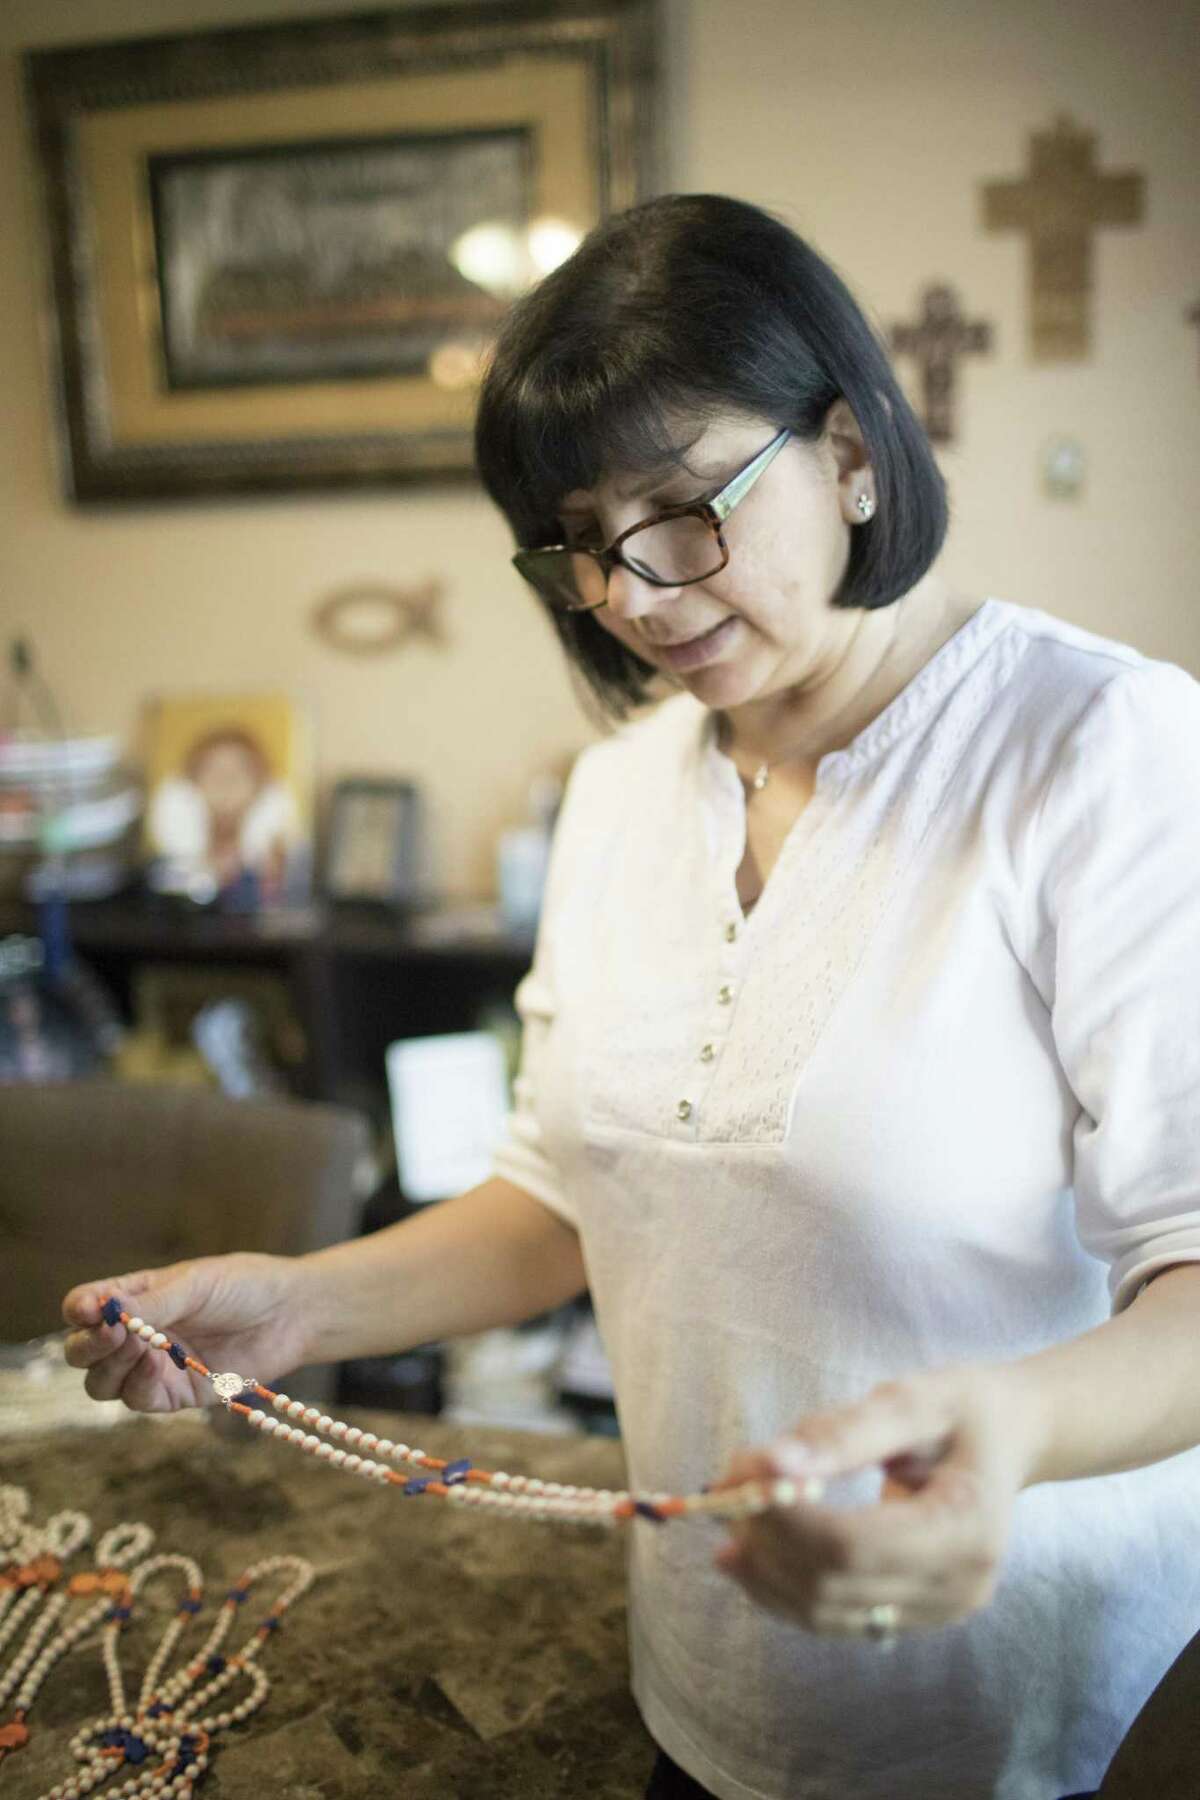 Maria Esther Aguilera takes a look at one of her Astros rosaries at her home, Monday, May 7, 2018, in Houston. Aguilera who makes rosaries has been working at least four hours a day making Astros rosaries to raise funds for the Annunciation Catholic Church. ( Marie D. De Jesus / Houston Chronicle )